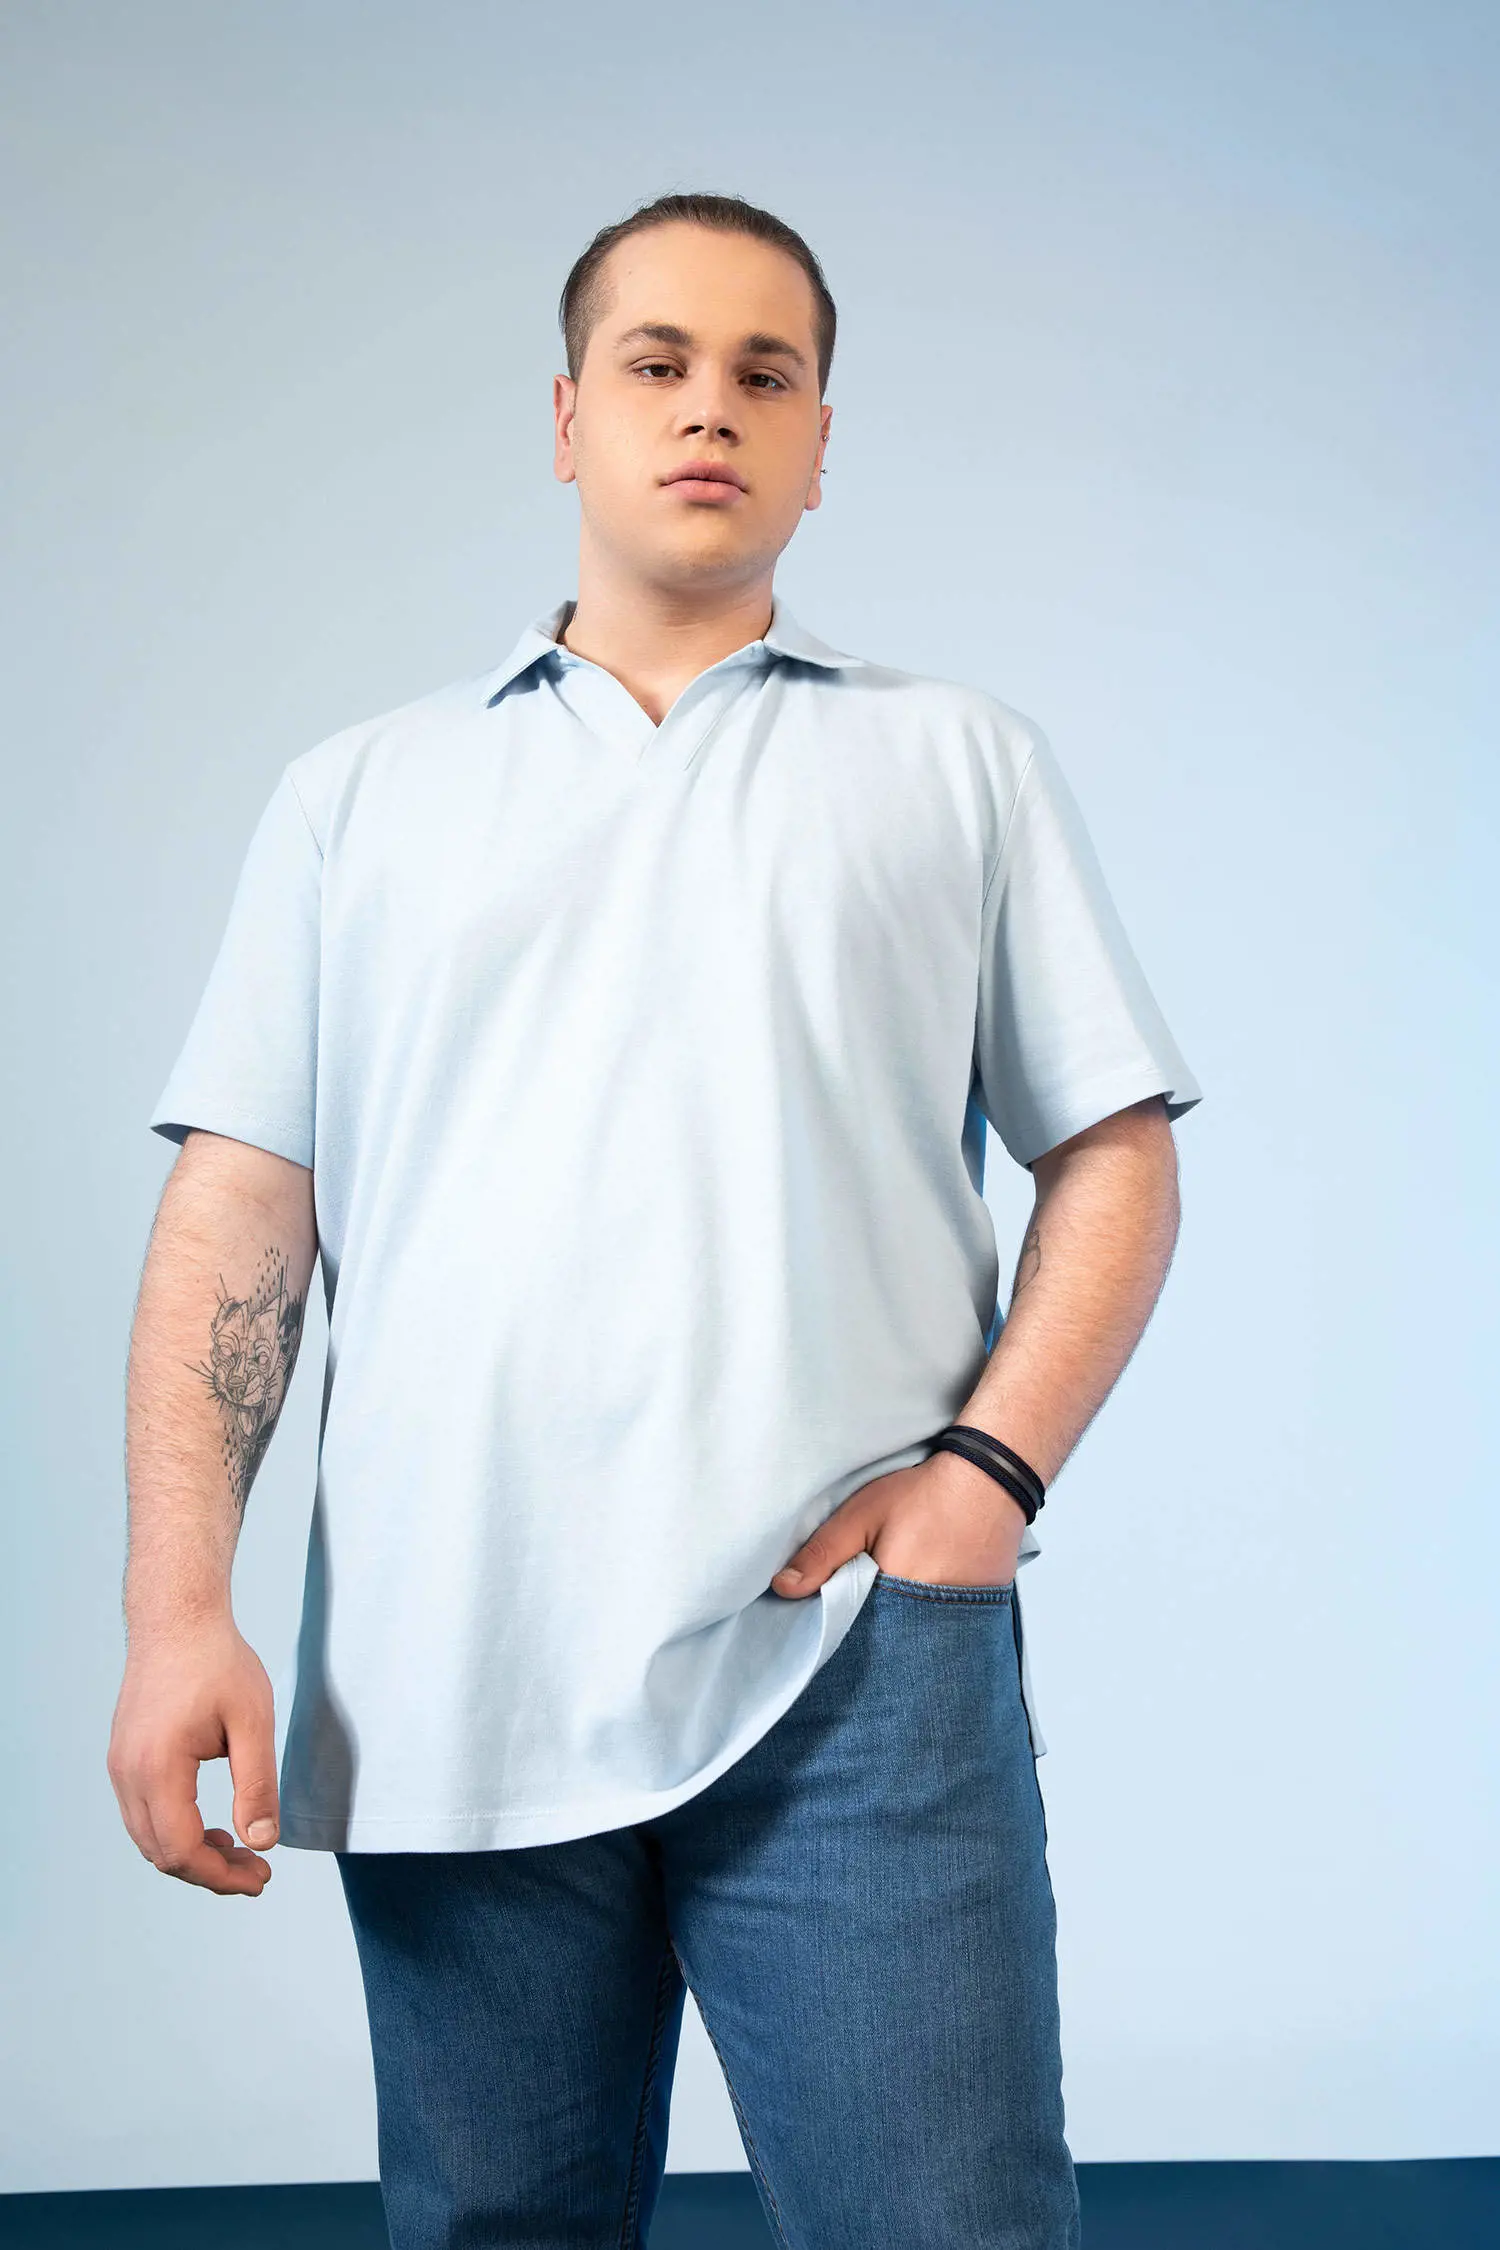 What Size Polo Shirt Should A 350Lb Man Wear: Find The Perfect Fit For ...